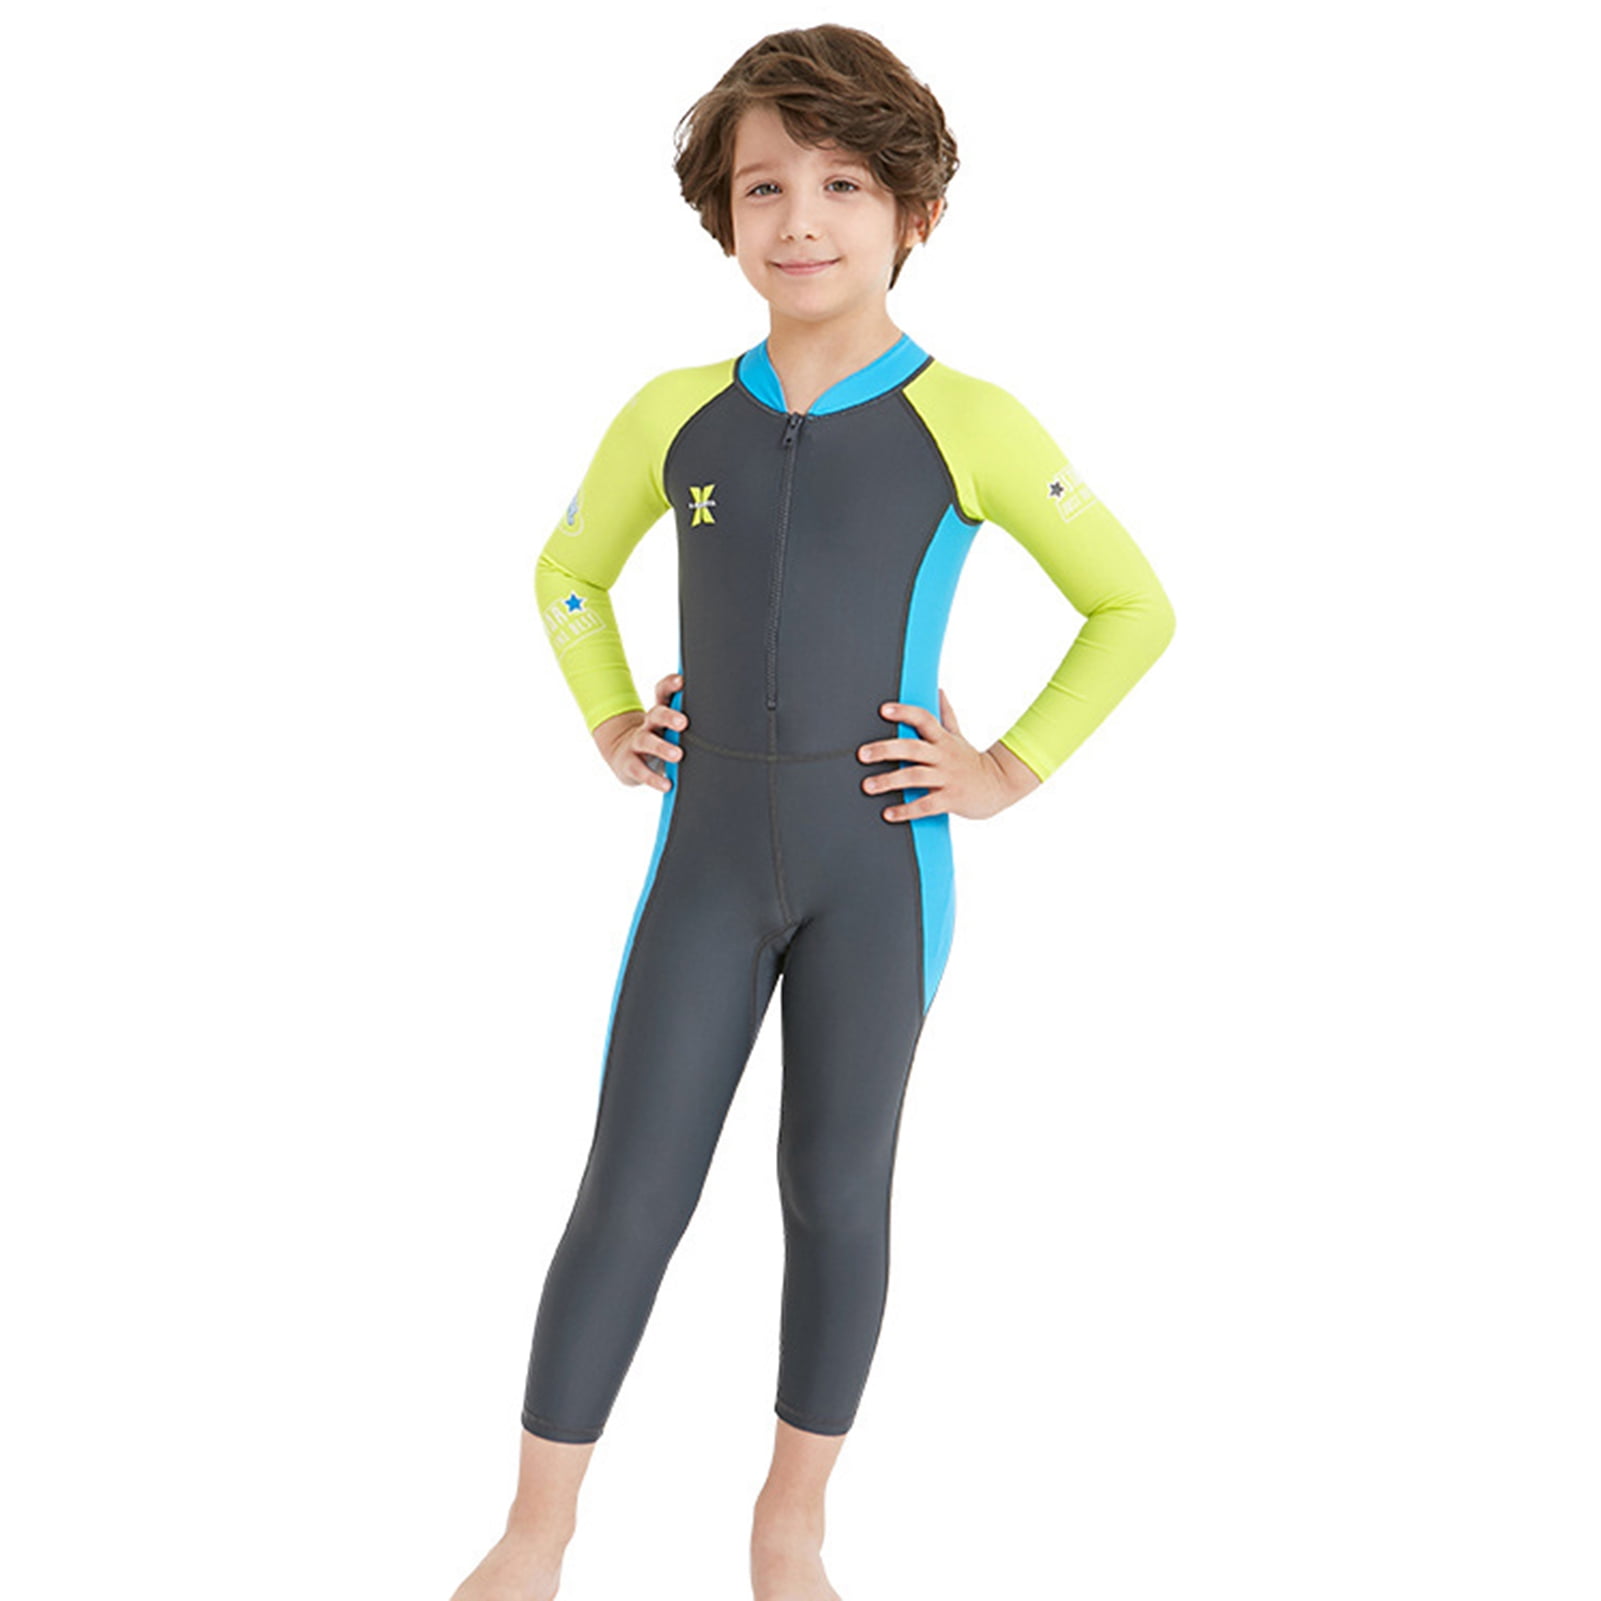 SURF STATE FULL LENGTH WETSUIT WETSUITS BODY BOARD SWIM SUIT KIDS BOYS GIRLS SEA 